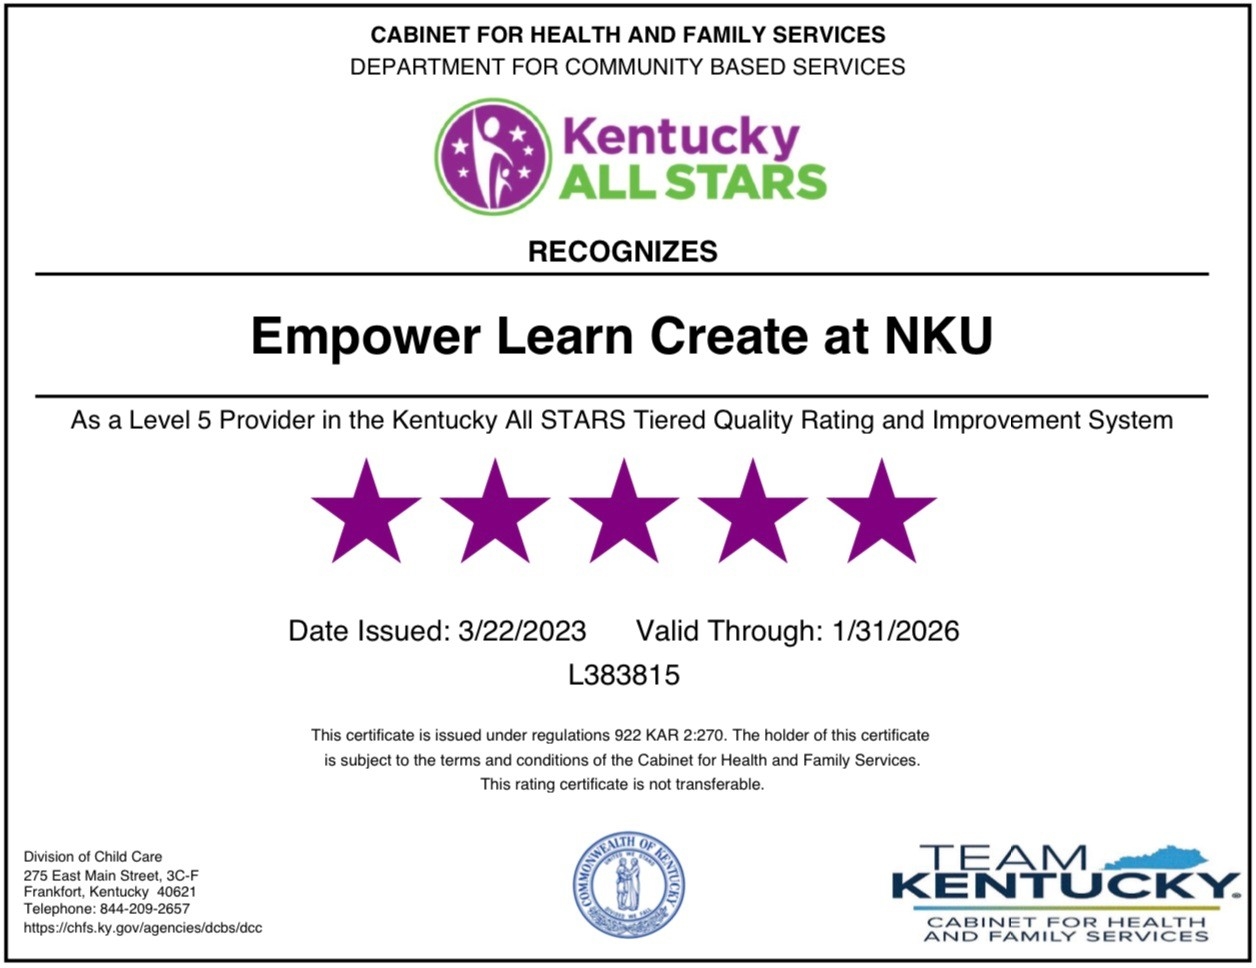 Empower Learn Create at NKU Level 5 Provider Certificate